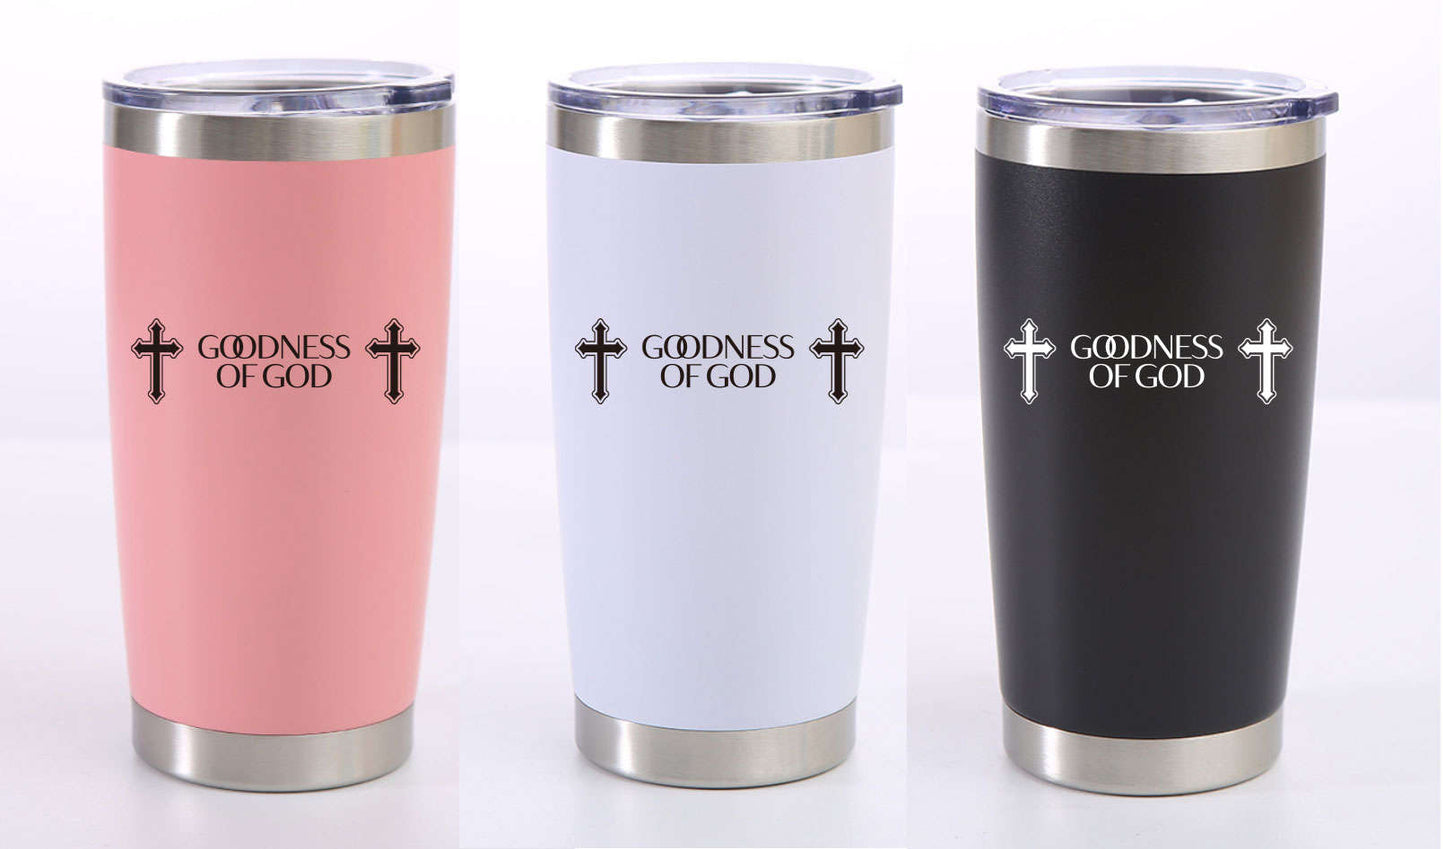 God double wall vacuum stainless steel coffee travel mug tumbler gifts